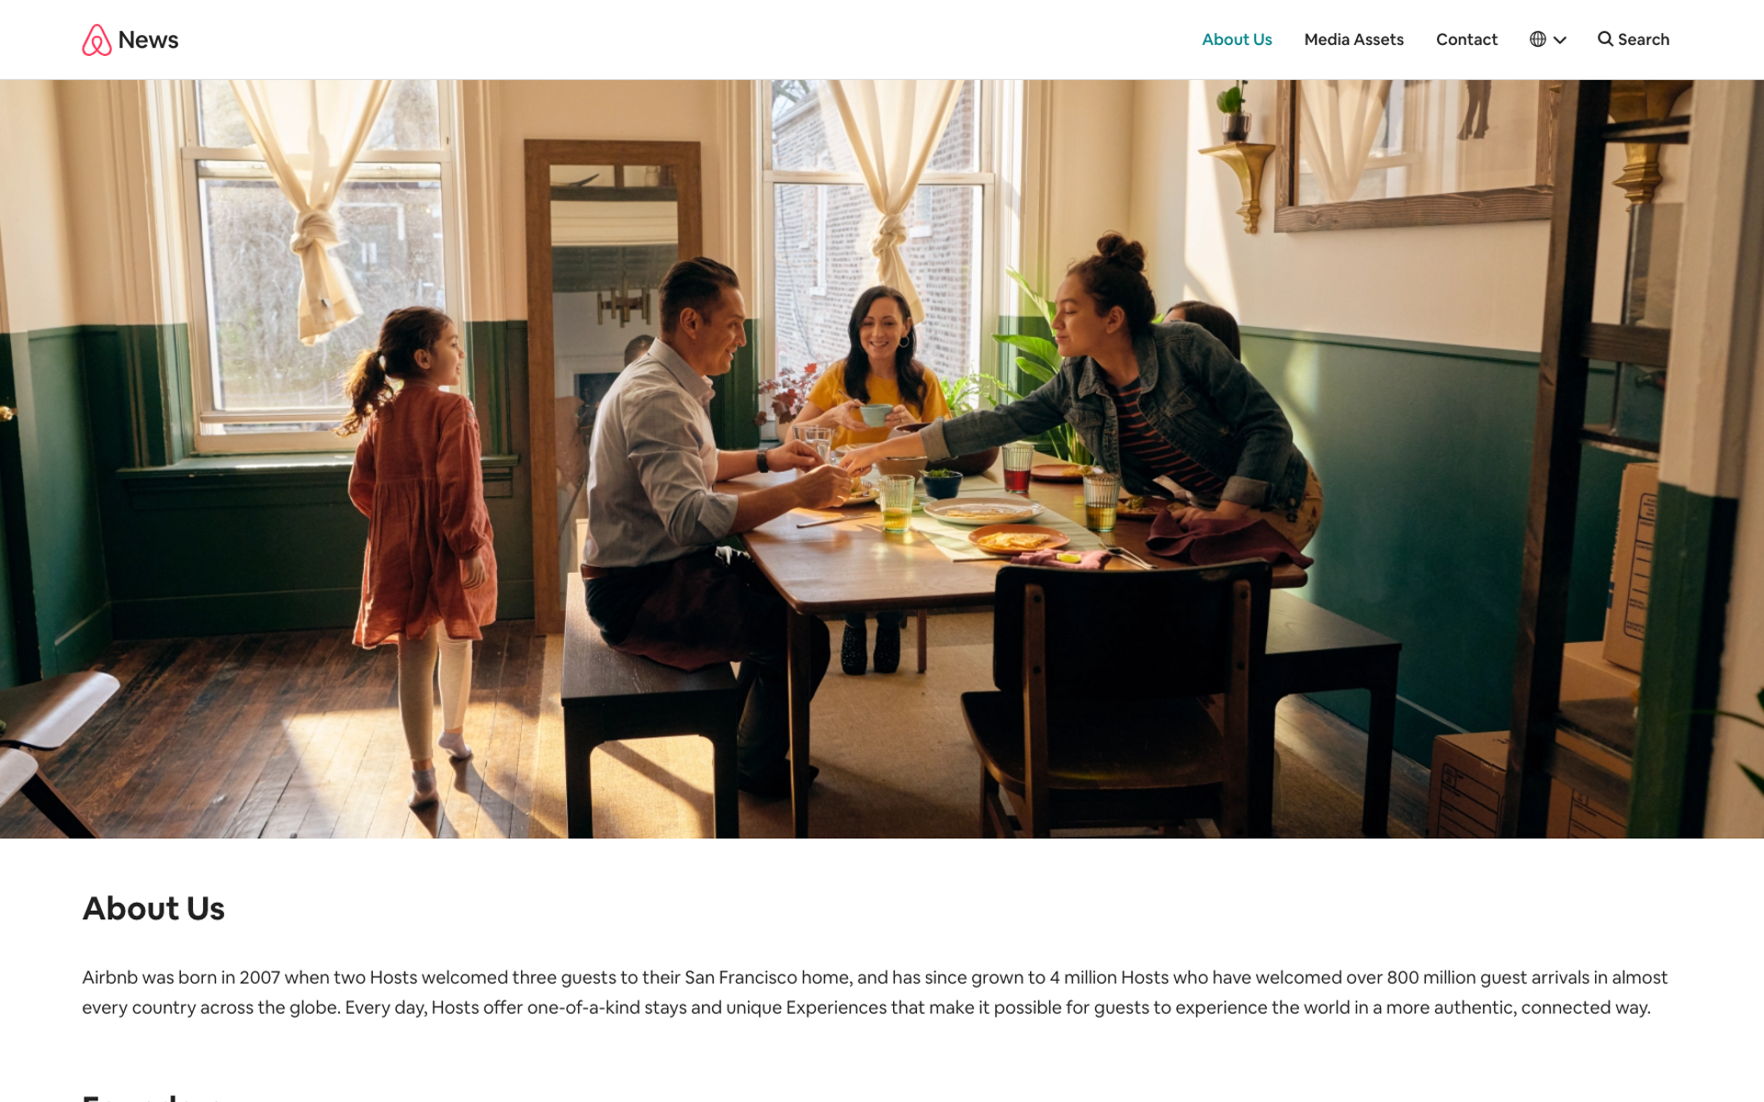 Airbnb has built a whole website to use as a hub for its brand